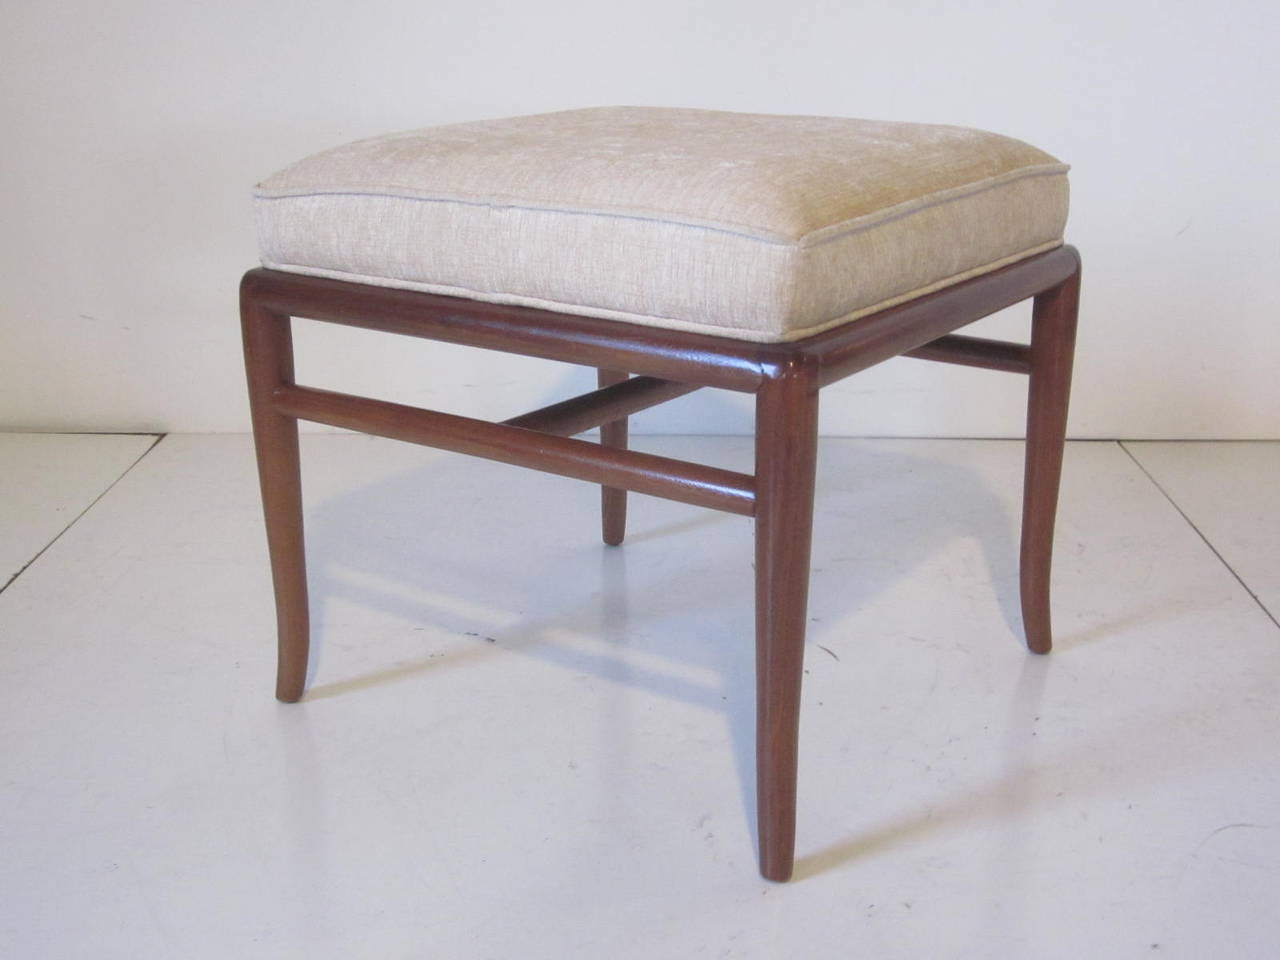 Upholstered stool with medium dark mahogany sabre wood legs and stretchers manufactured by the Widdicomb Furniture Company.